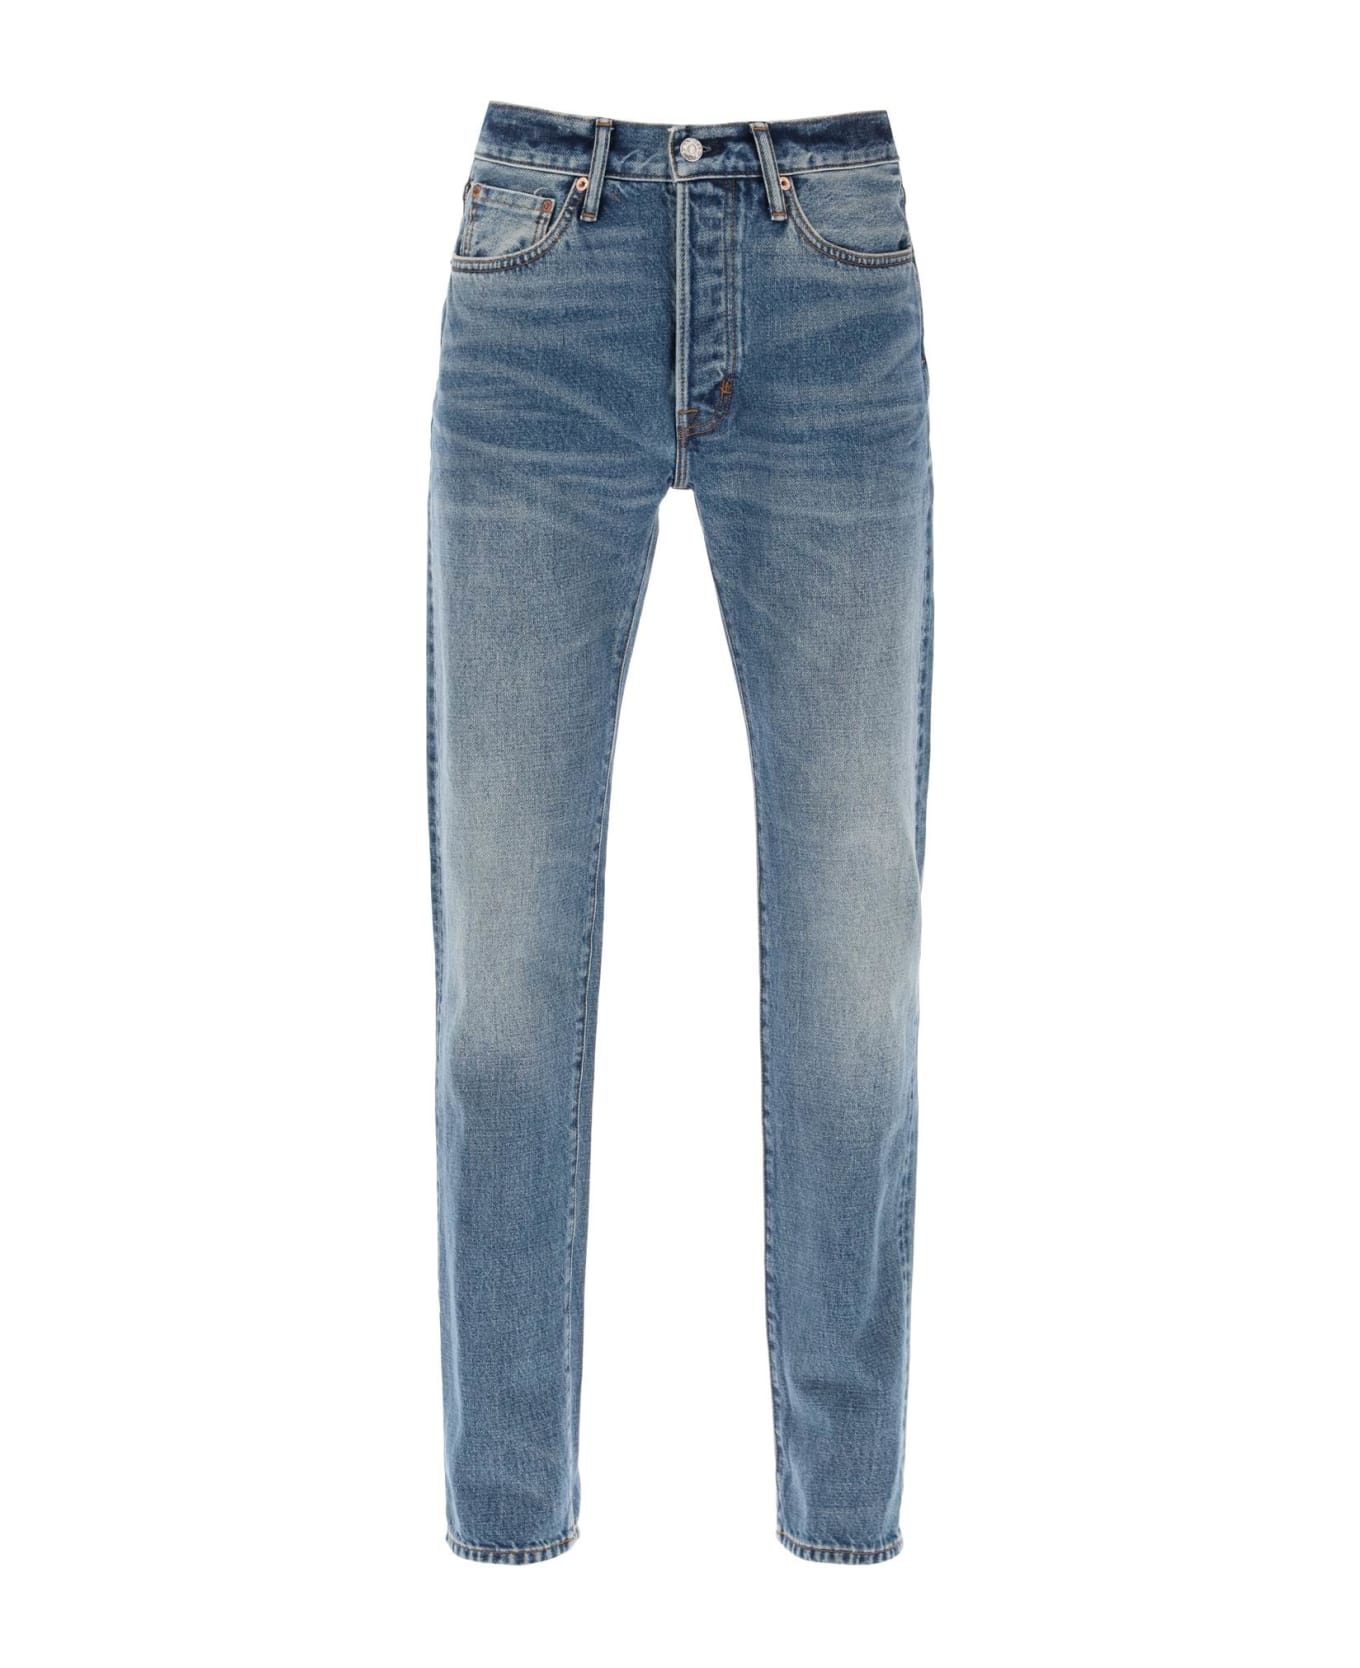 Tom Ford Regular Fit Jeans - NEW STRONG HIGH LOW (Blue)